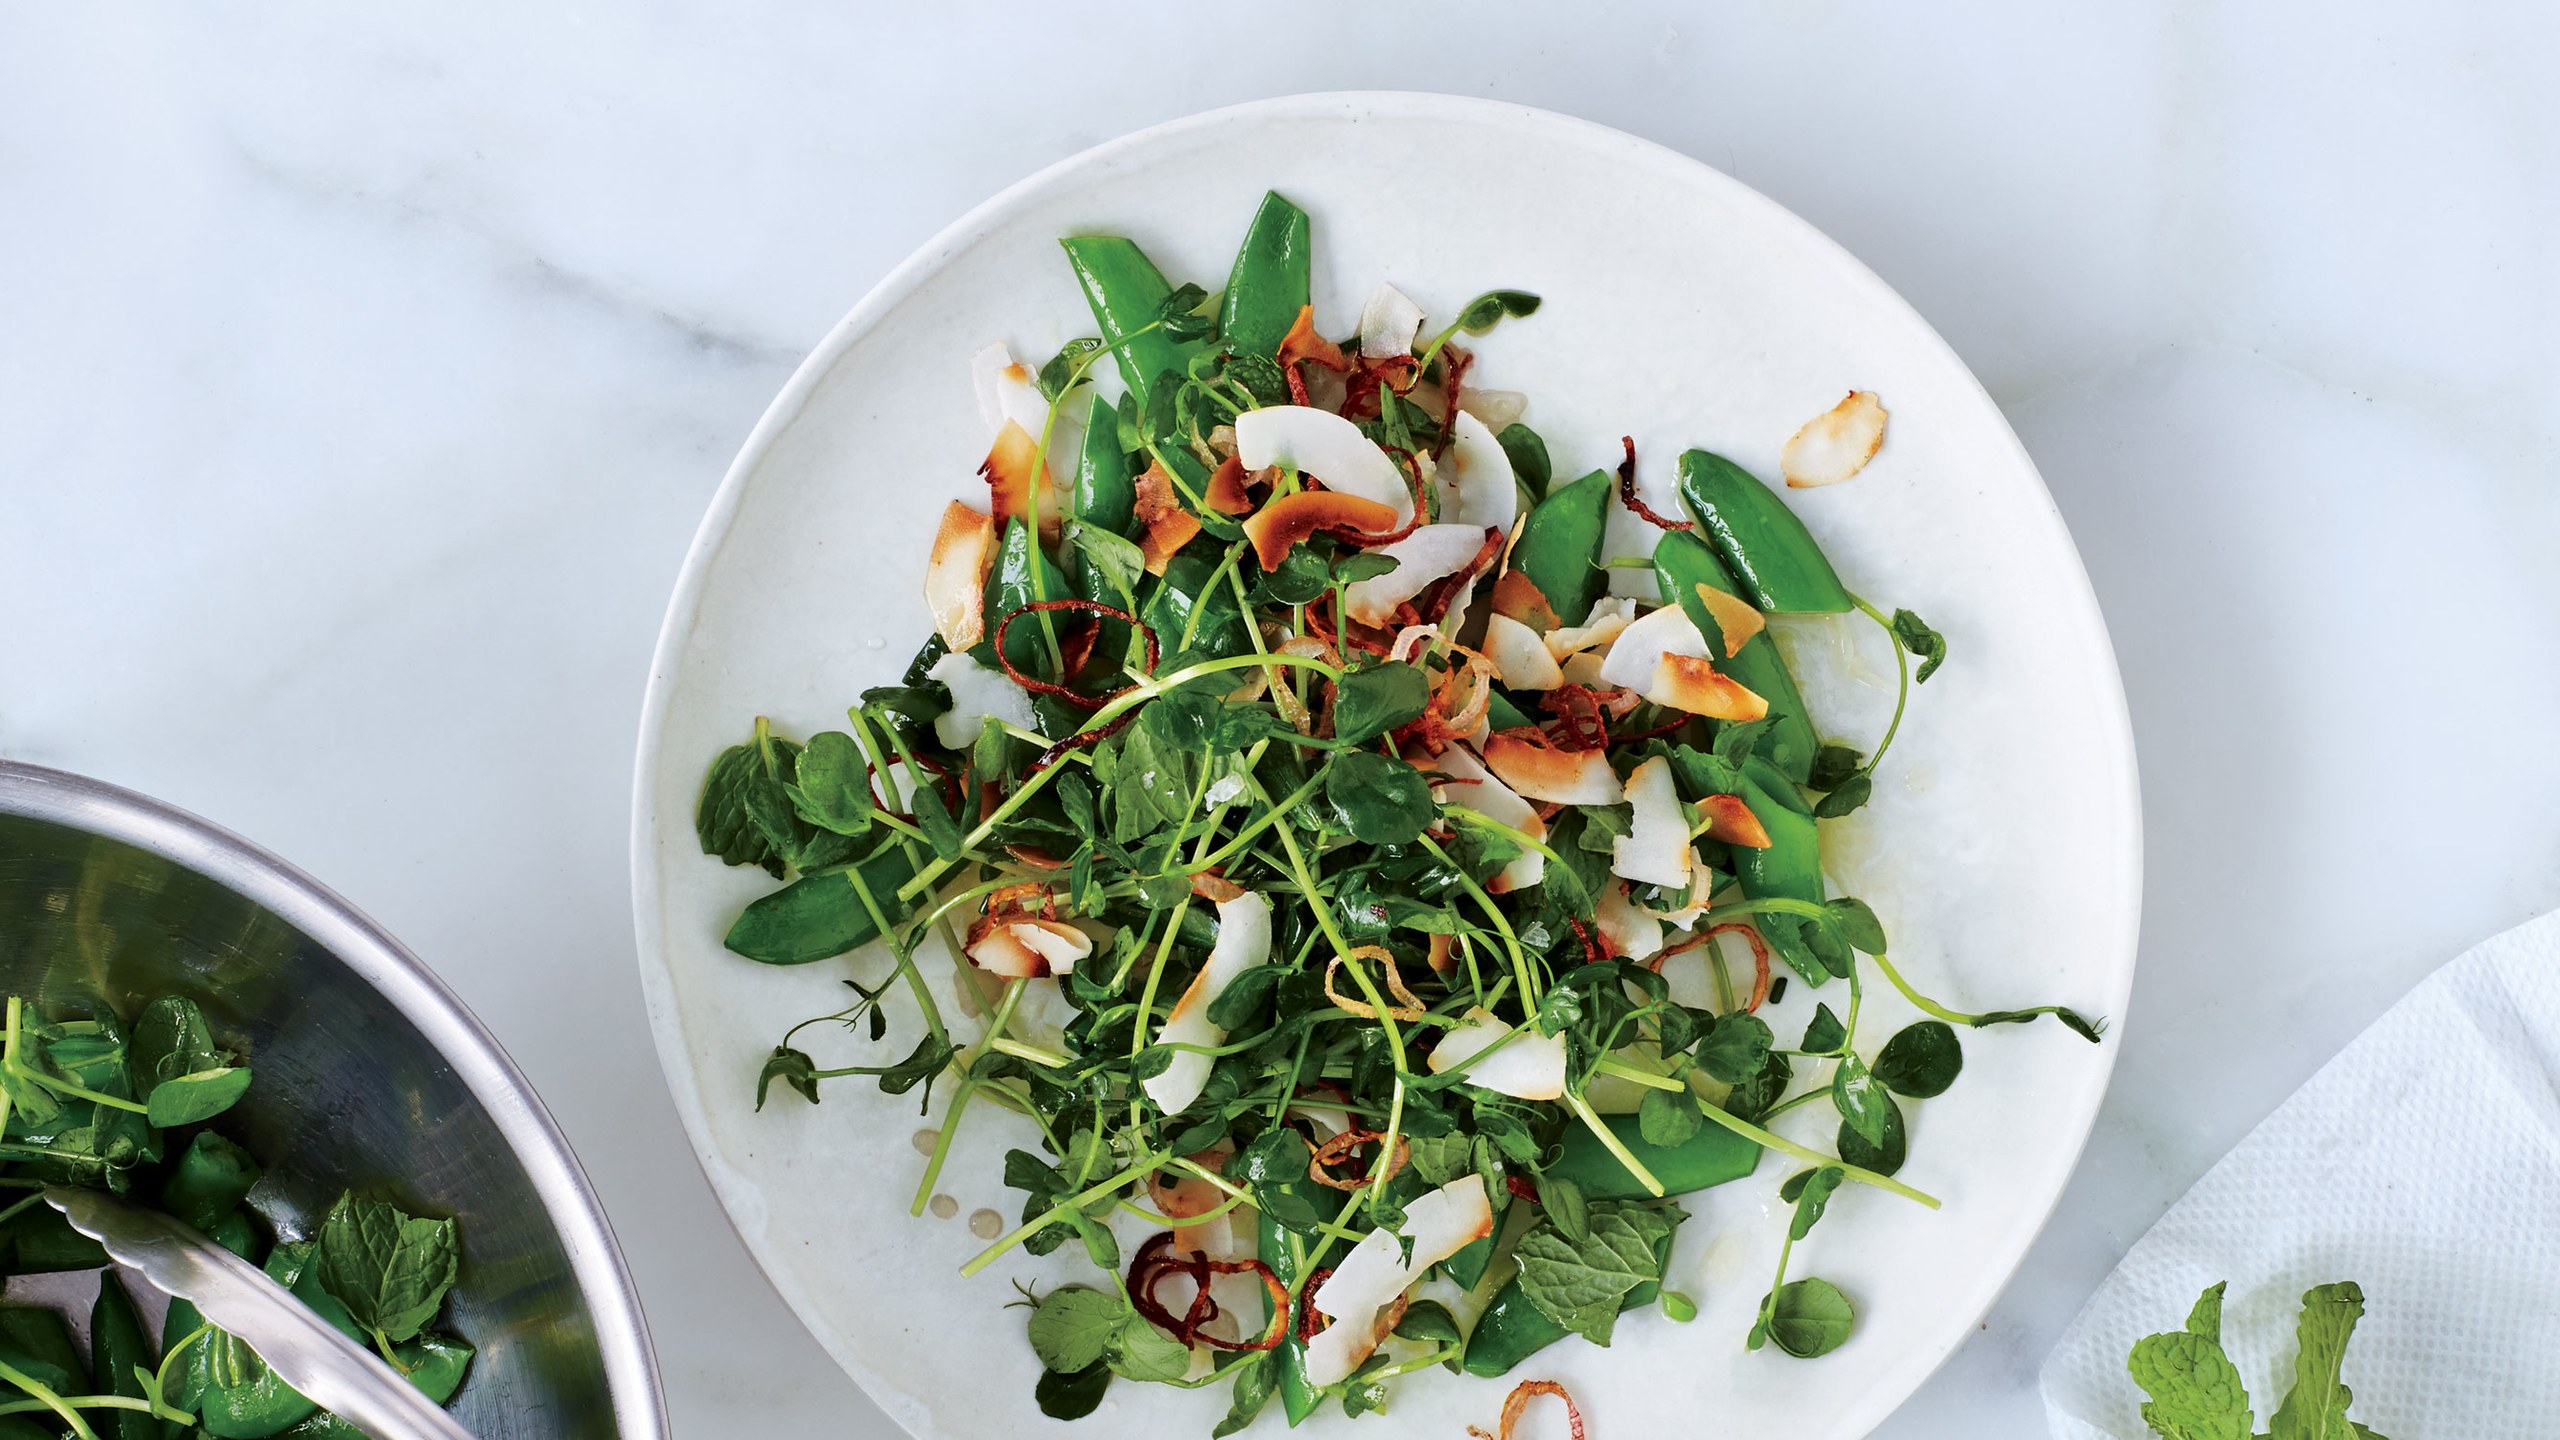 Snap Pea Salad with Coconut Gremolata Easter Brunch: 8 Recipes to Serve Your Family